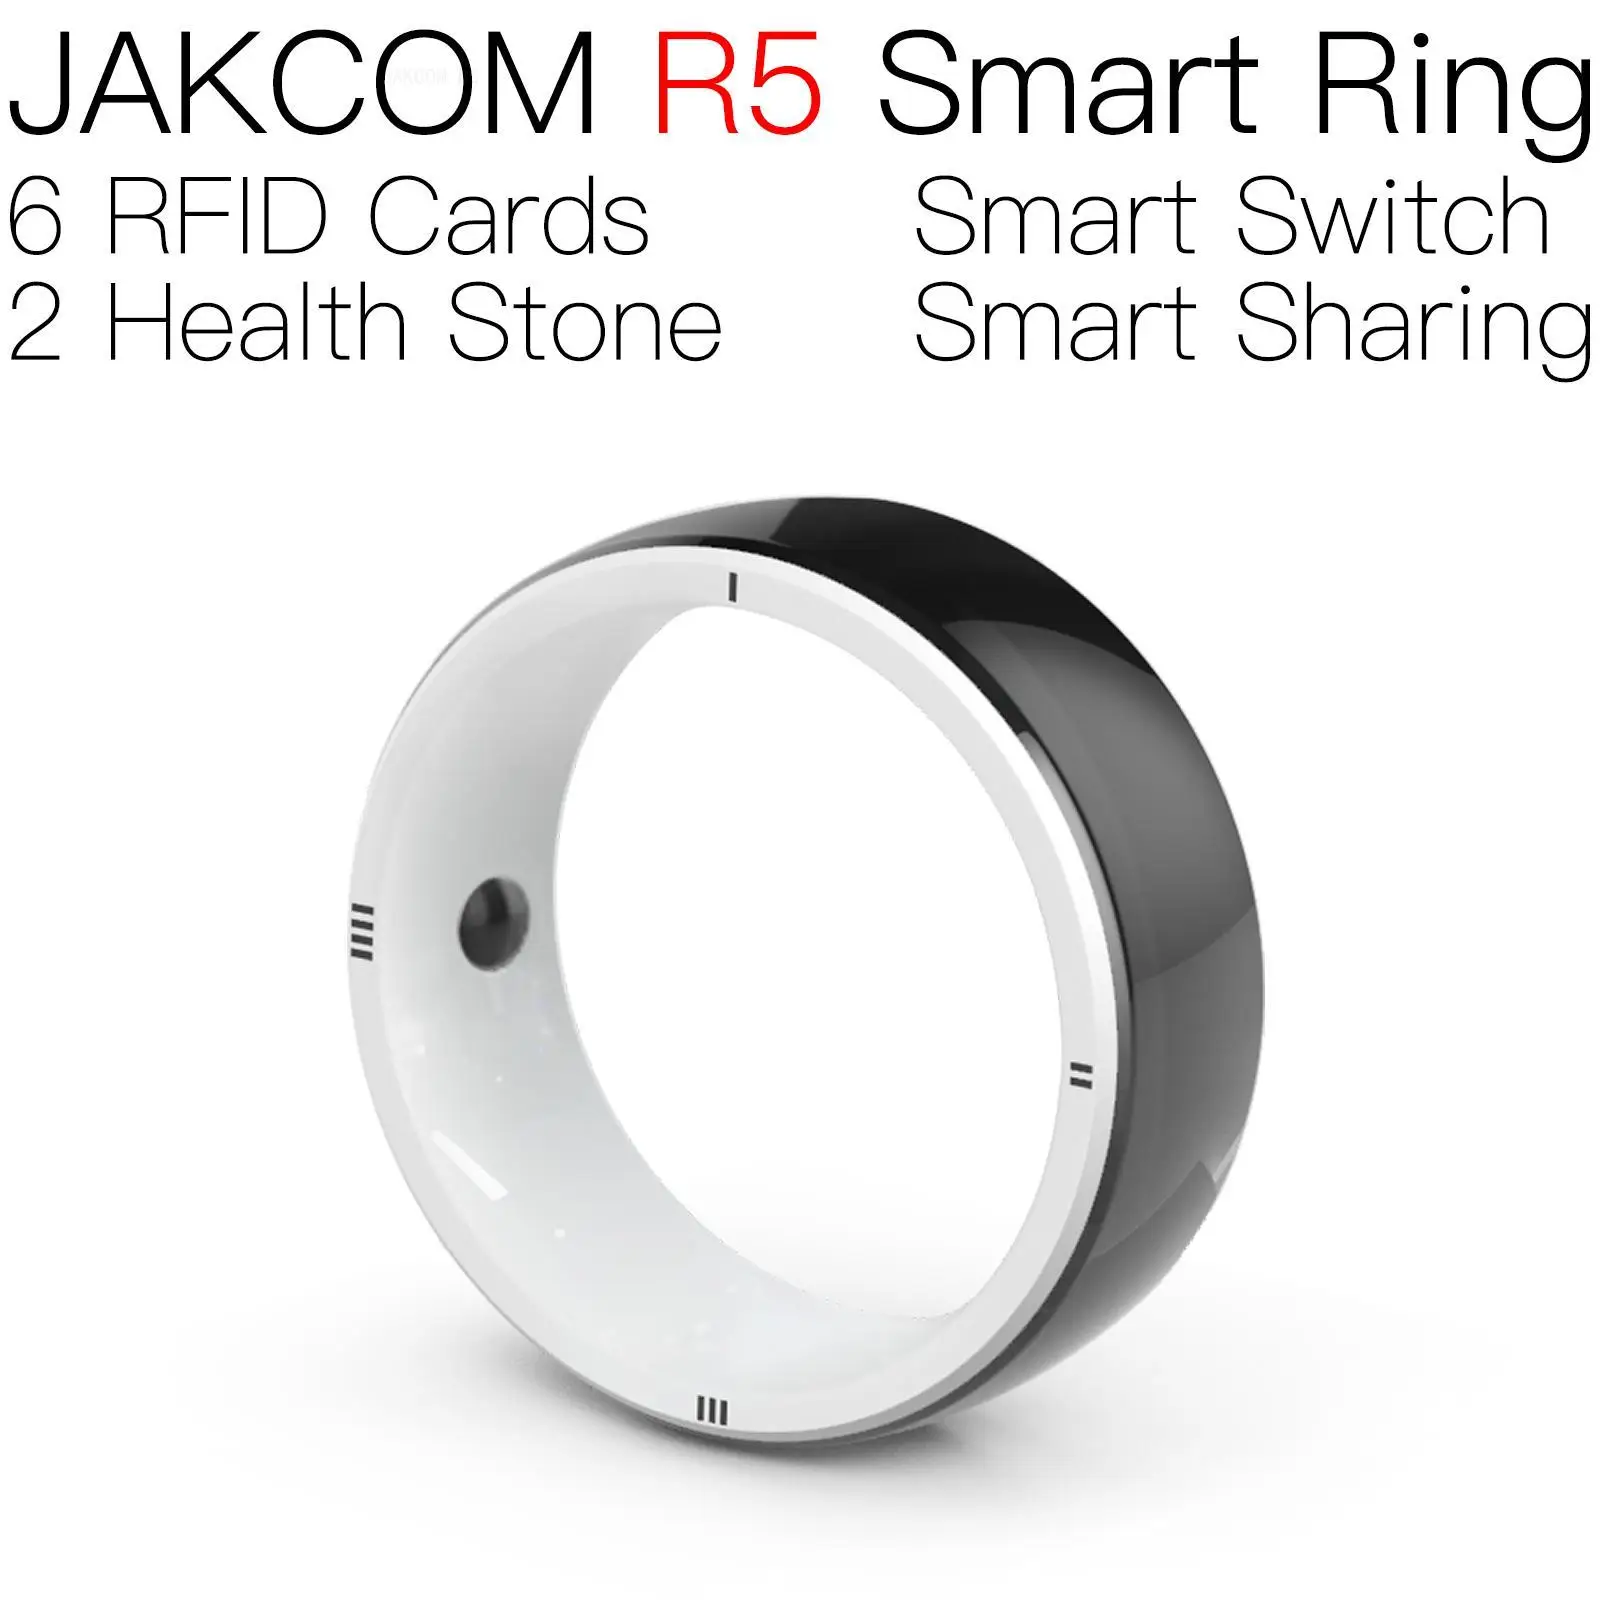 

JAKCOM R5 Smart Ring New product as switch amibo rfid uhf nfc 100 thousands answer passive fob unlock chip tag zip 900